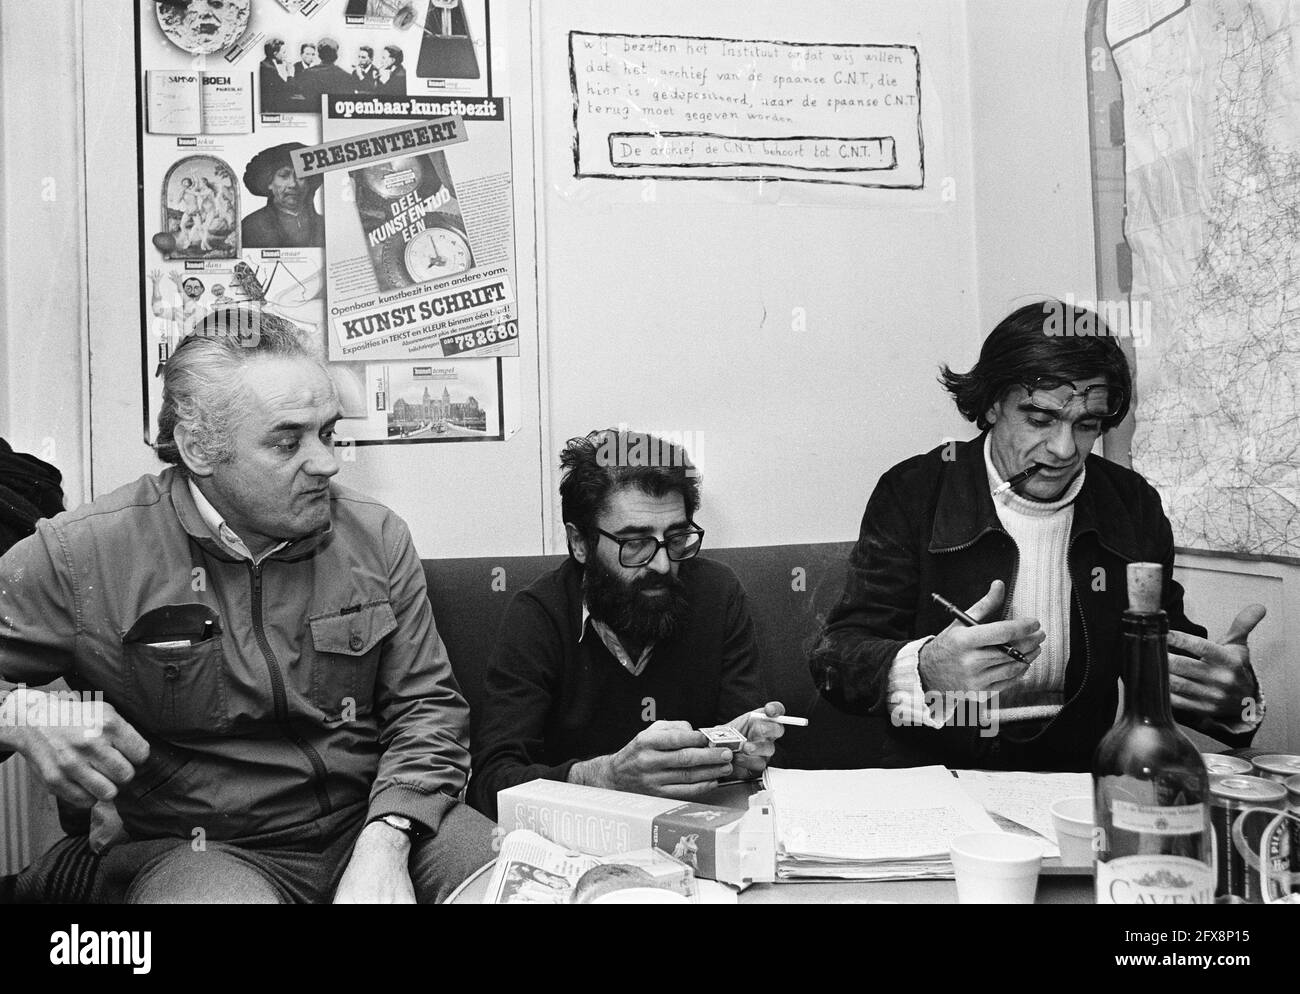 Occupiers around a table, December 19, 1979, civil servants, occupations, clutter, students, tables, scientific education, The Netherlands, 20th century press agency photo, news to remember, documentary, historic photography 1945-1990, visual stories, human history of the Twentieth Century, capturing moments in time Stock Photo